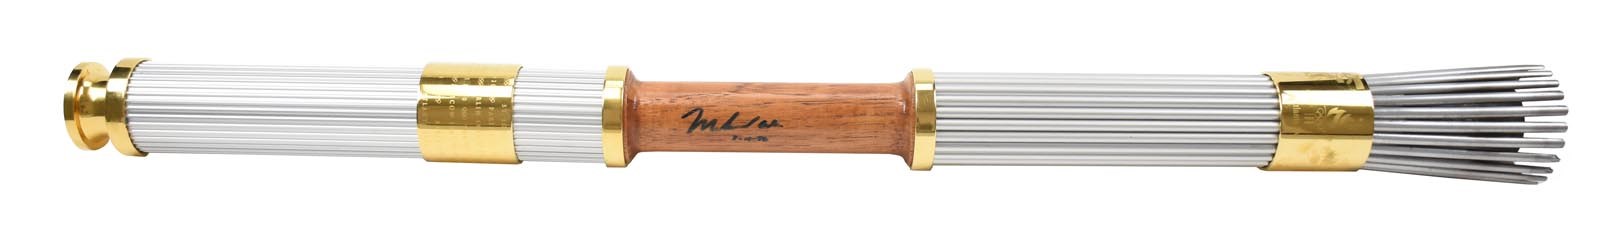 Best of the Best - 1996 Atlanta Olympic Summer Games Torch Signed By Muhammad Ali